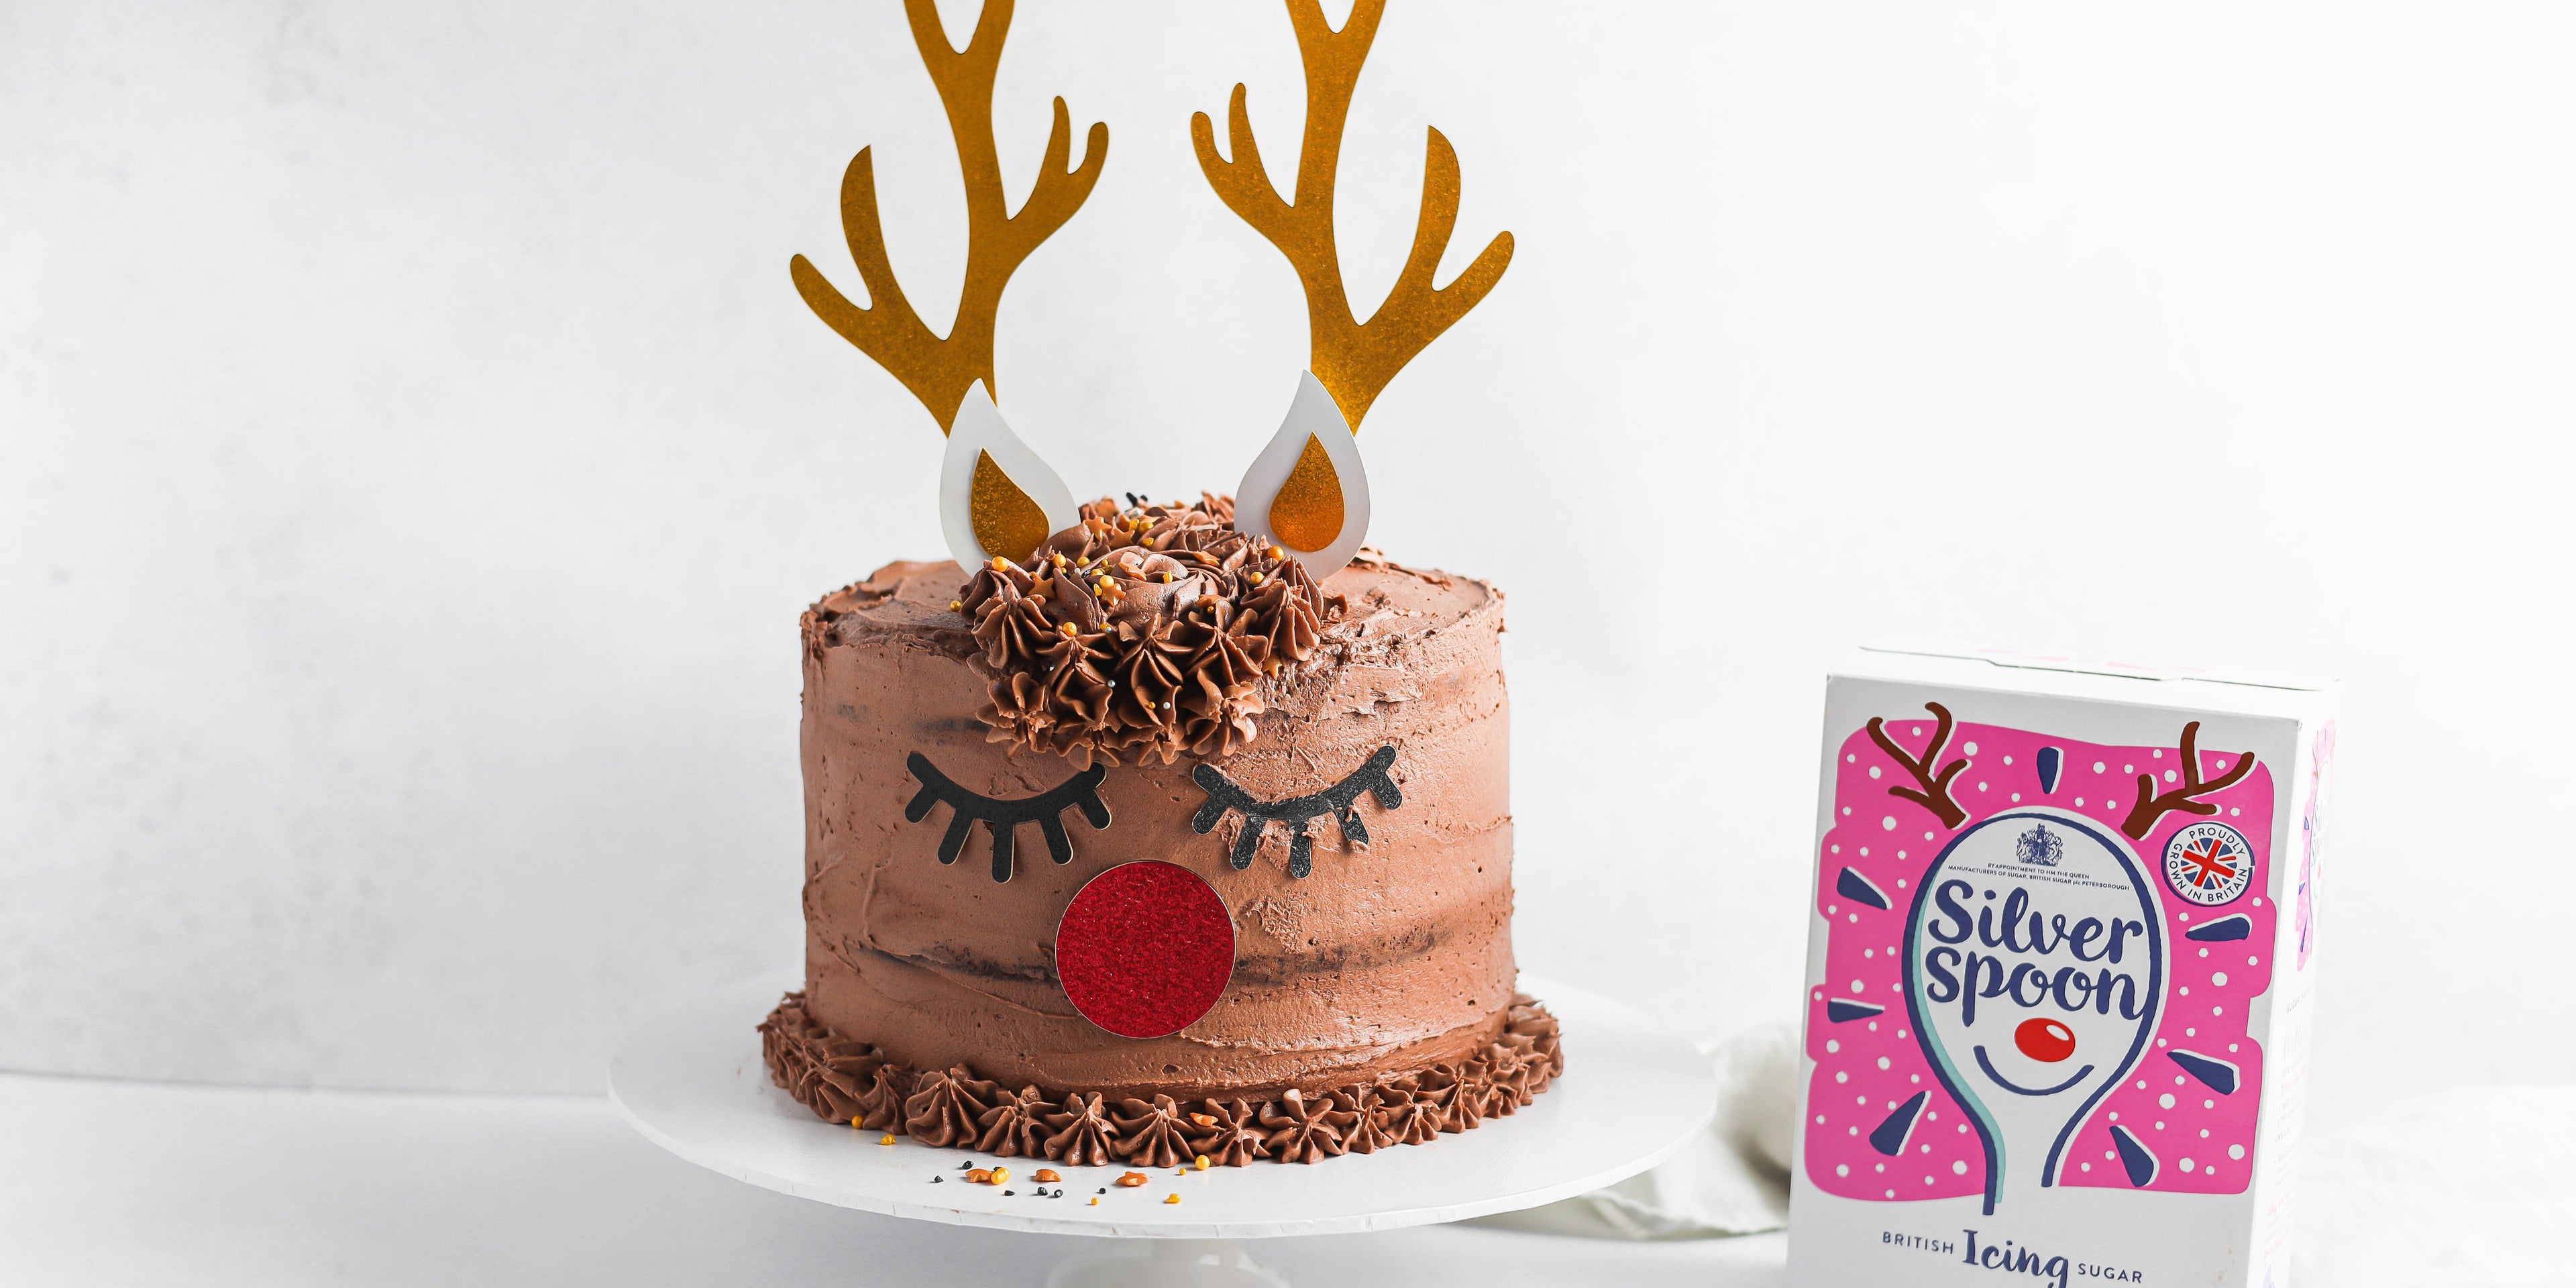 Christmas Reindeer Cake next to a box of Silver Spoon Icing Sugar